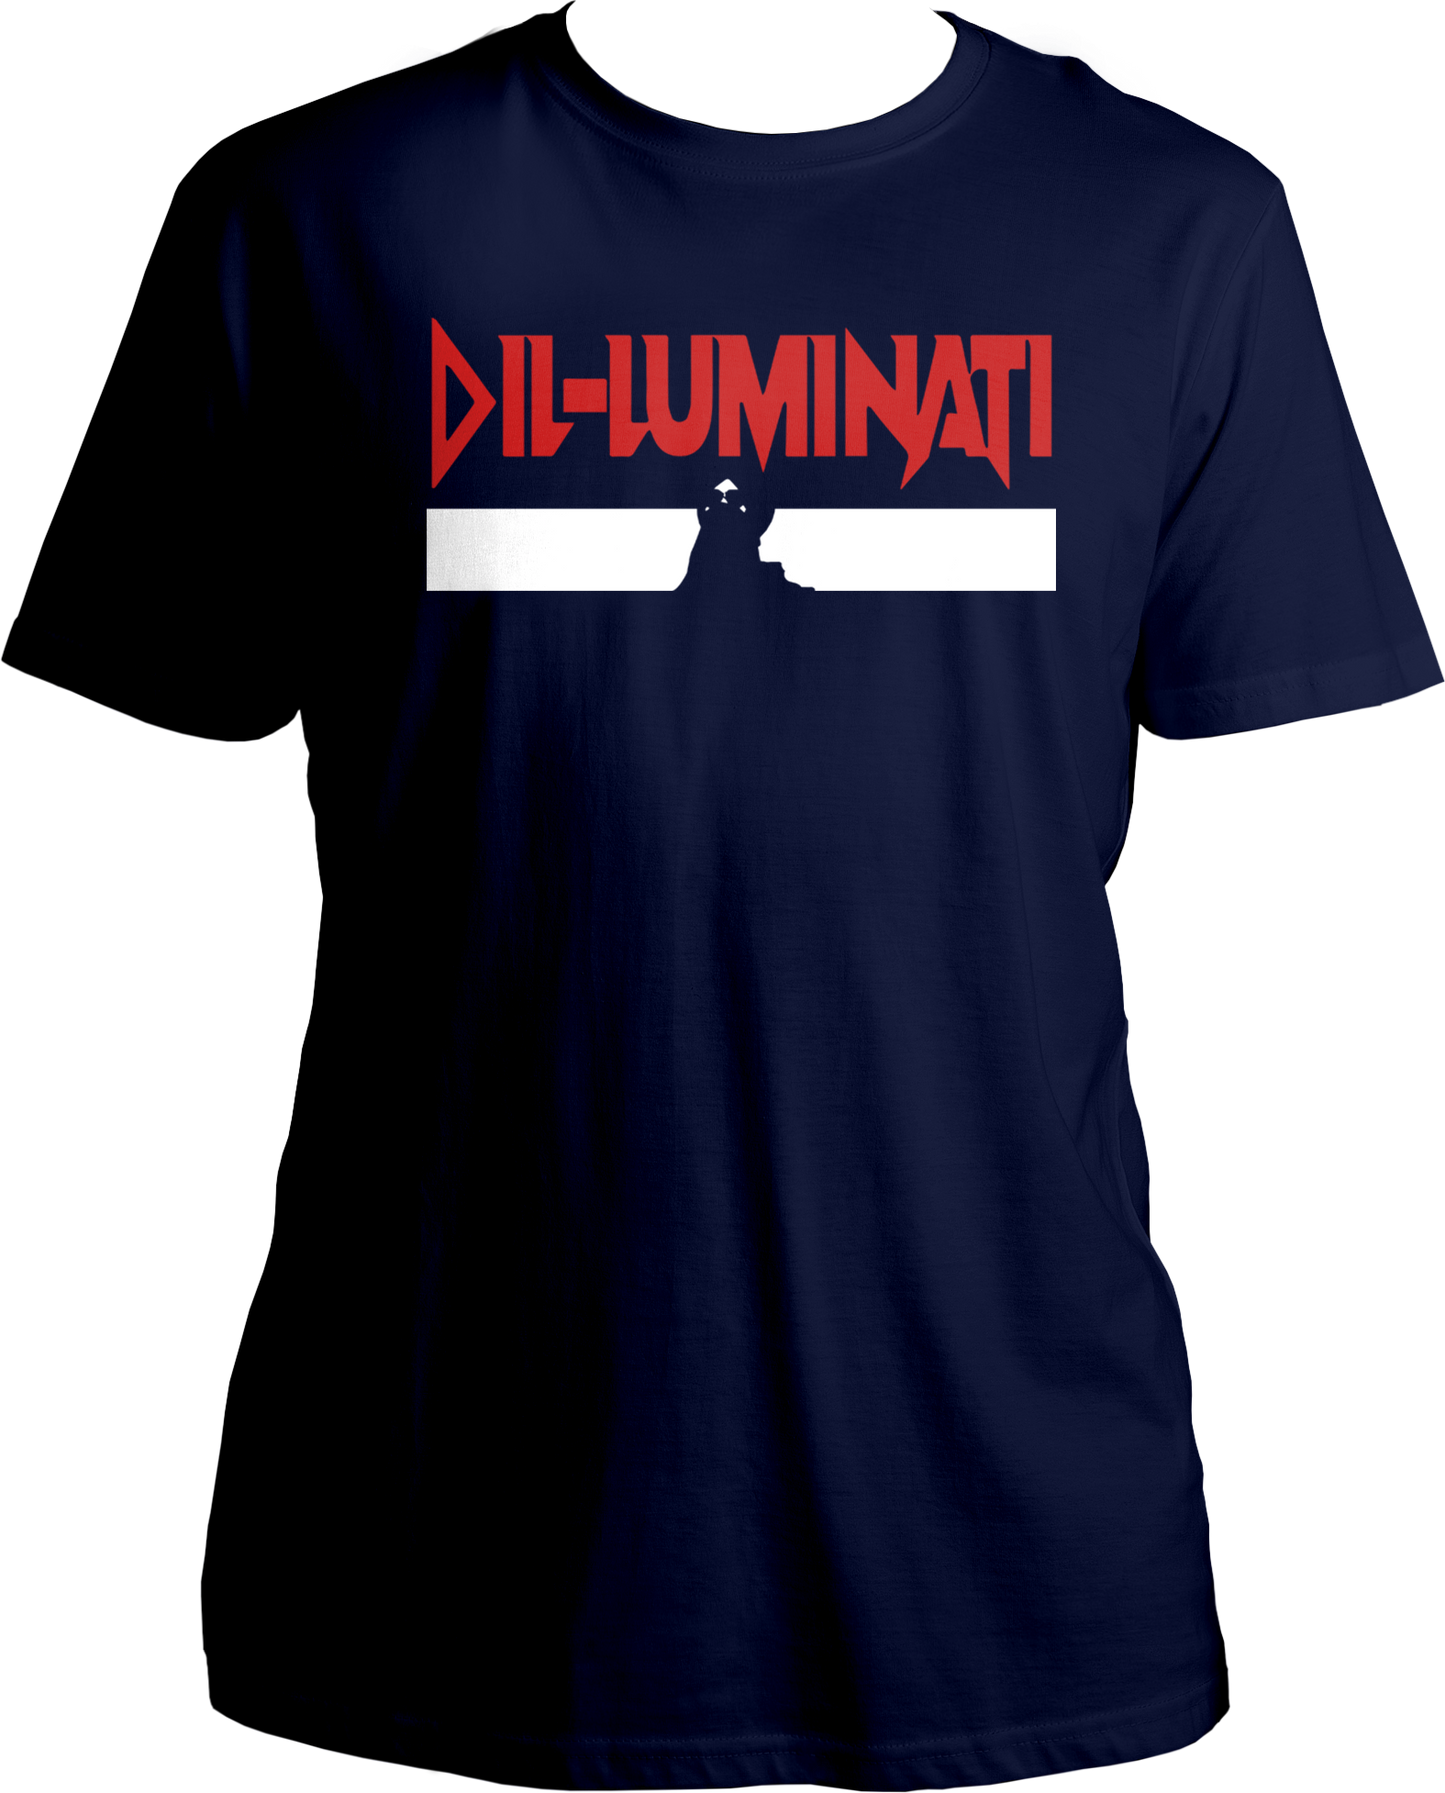 Our "DIL-LUMINATI" T-shirt is crafted with the same attention to detail and quality that defines Diljit's superb singing prowess. Made from premium cotton, this tee offers unparalleled comfort and durability, just like the unforgettable tunes that resonate in our hearts.